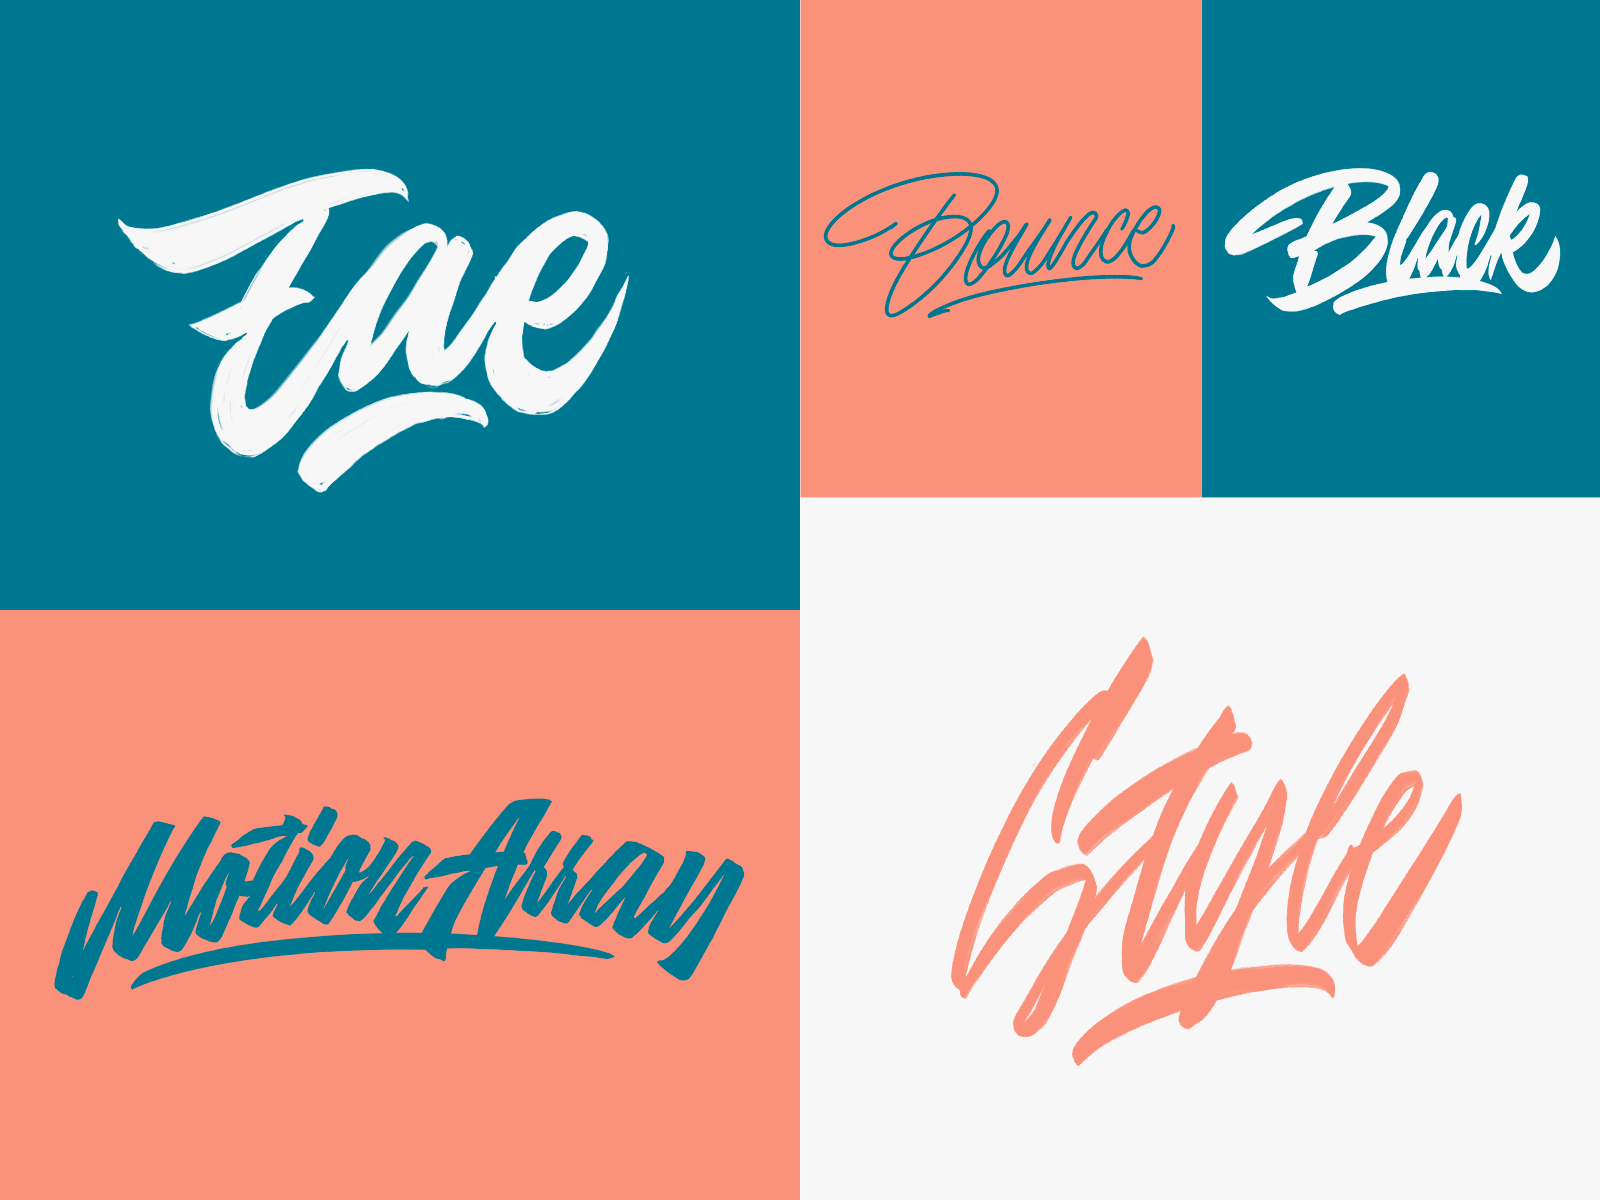 Lettering Sketches Collection by Yevdokimov on Dribbble